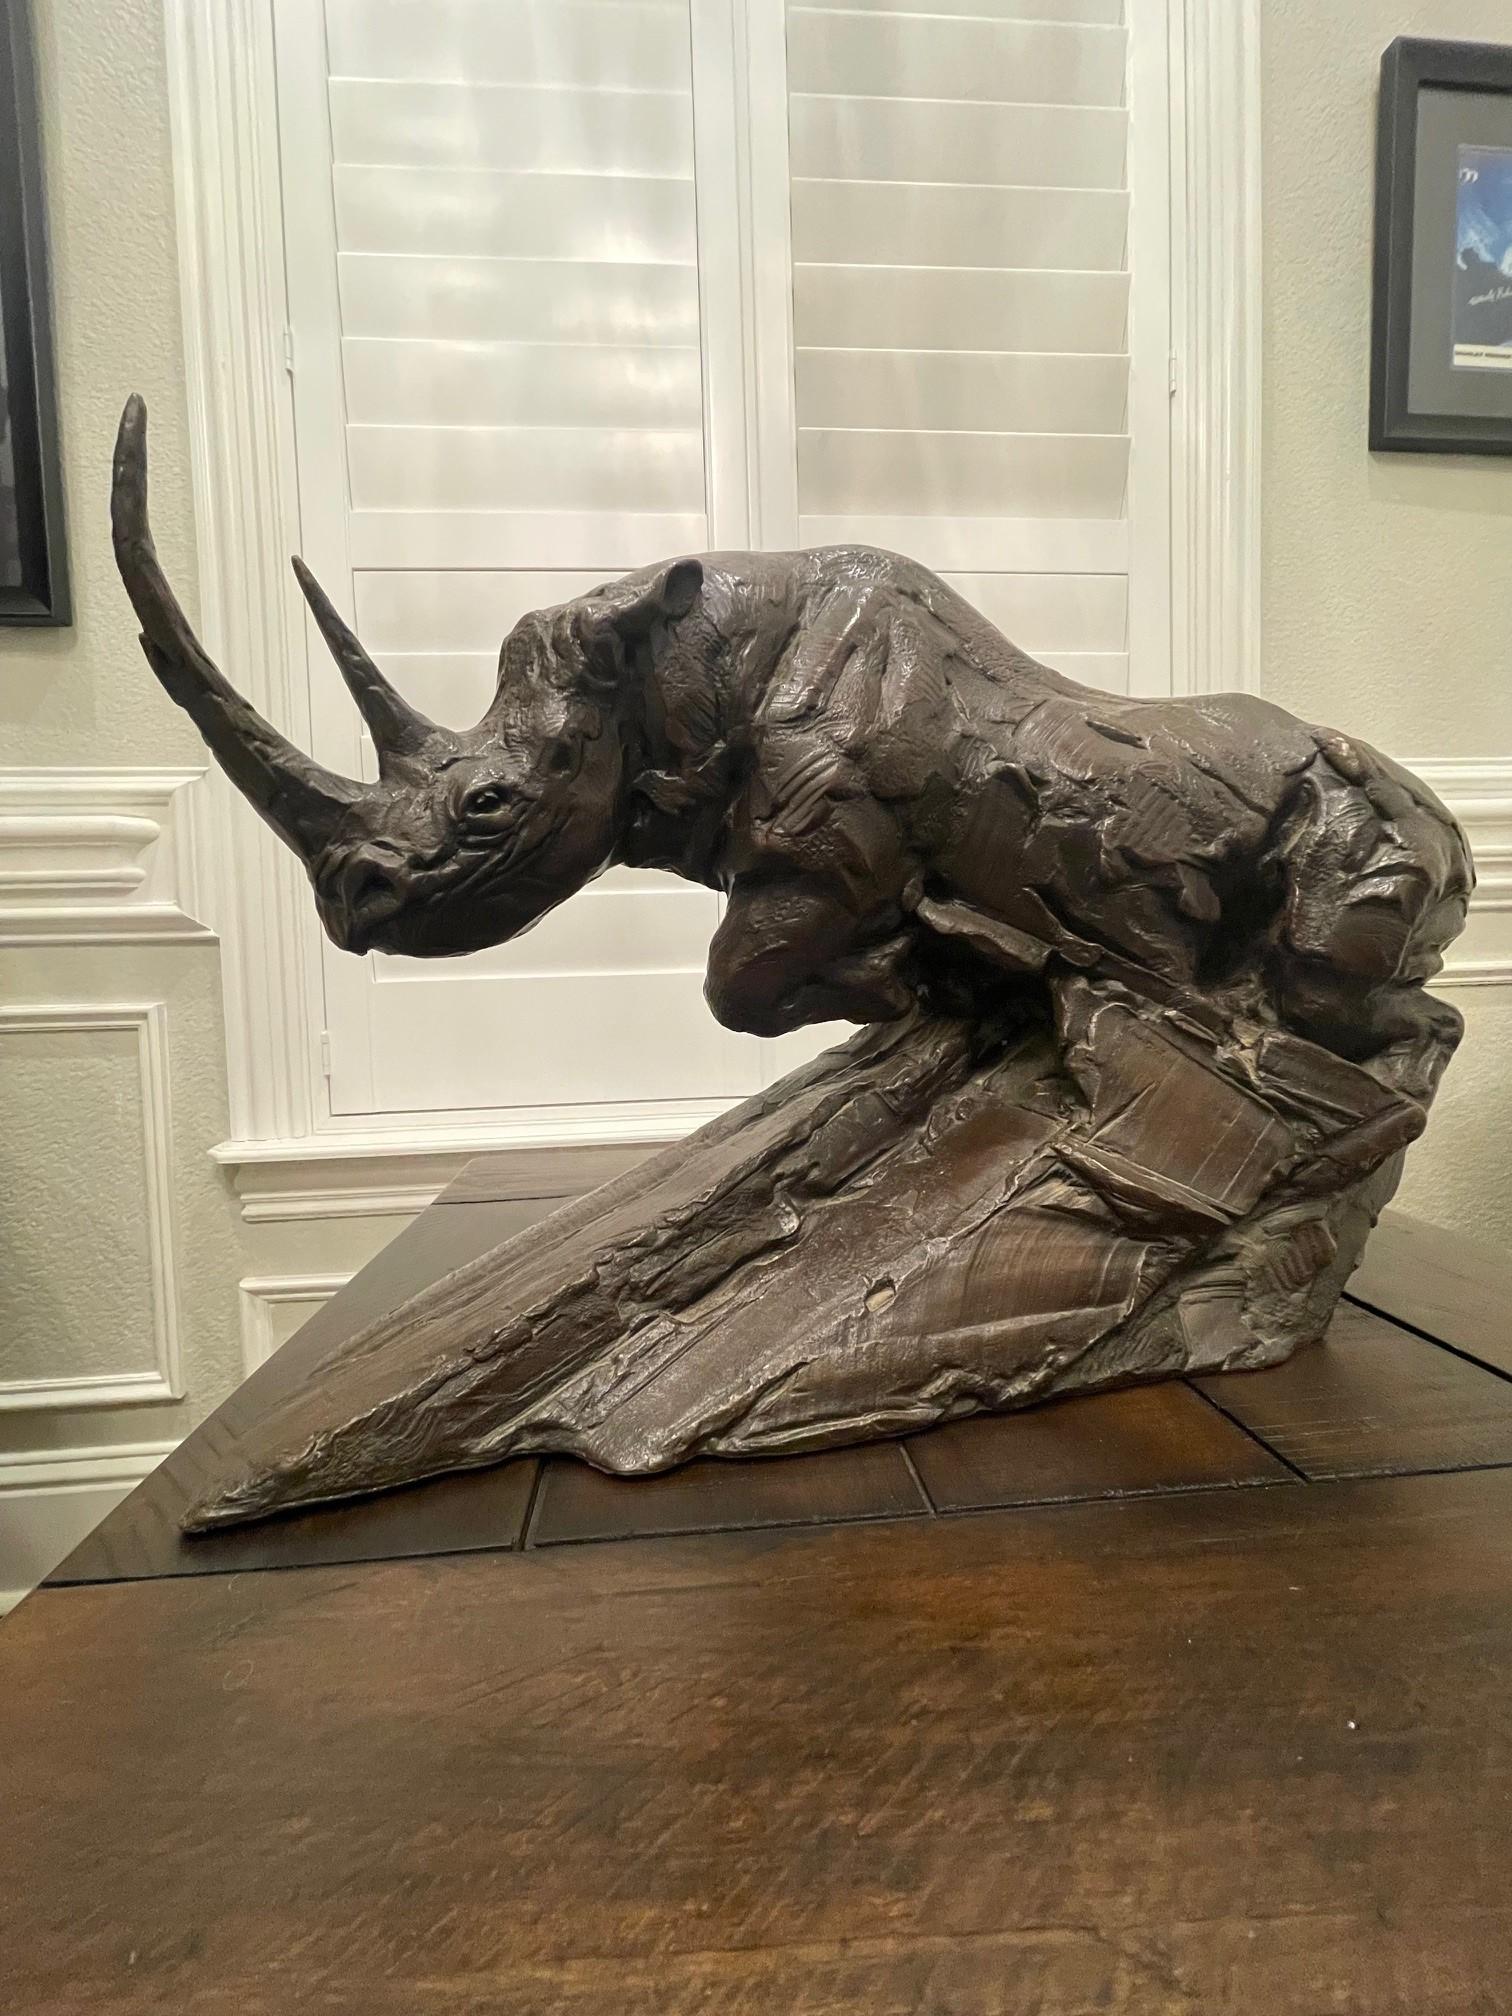 Dylan Lewis Bronze Charging Black Rhino, Maquette
S136 Charging Black Rhinoceros Maquette Numbered 4/15

DYLAN LEWIS (B. 1964)
Bronze
‘Dylan Lewis, ‘SCS Foundry’ stamp
The edition of number 4, of a series of 15
Signed and Numbered 4/15

This piece